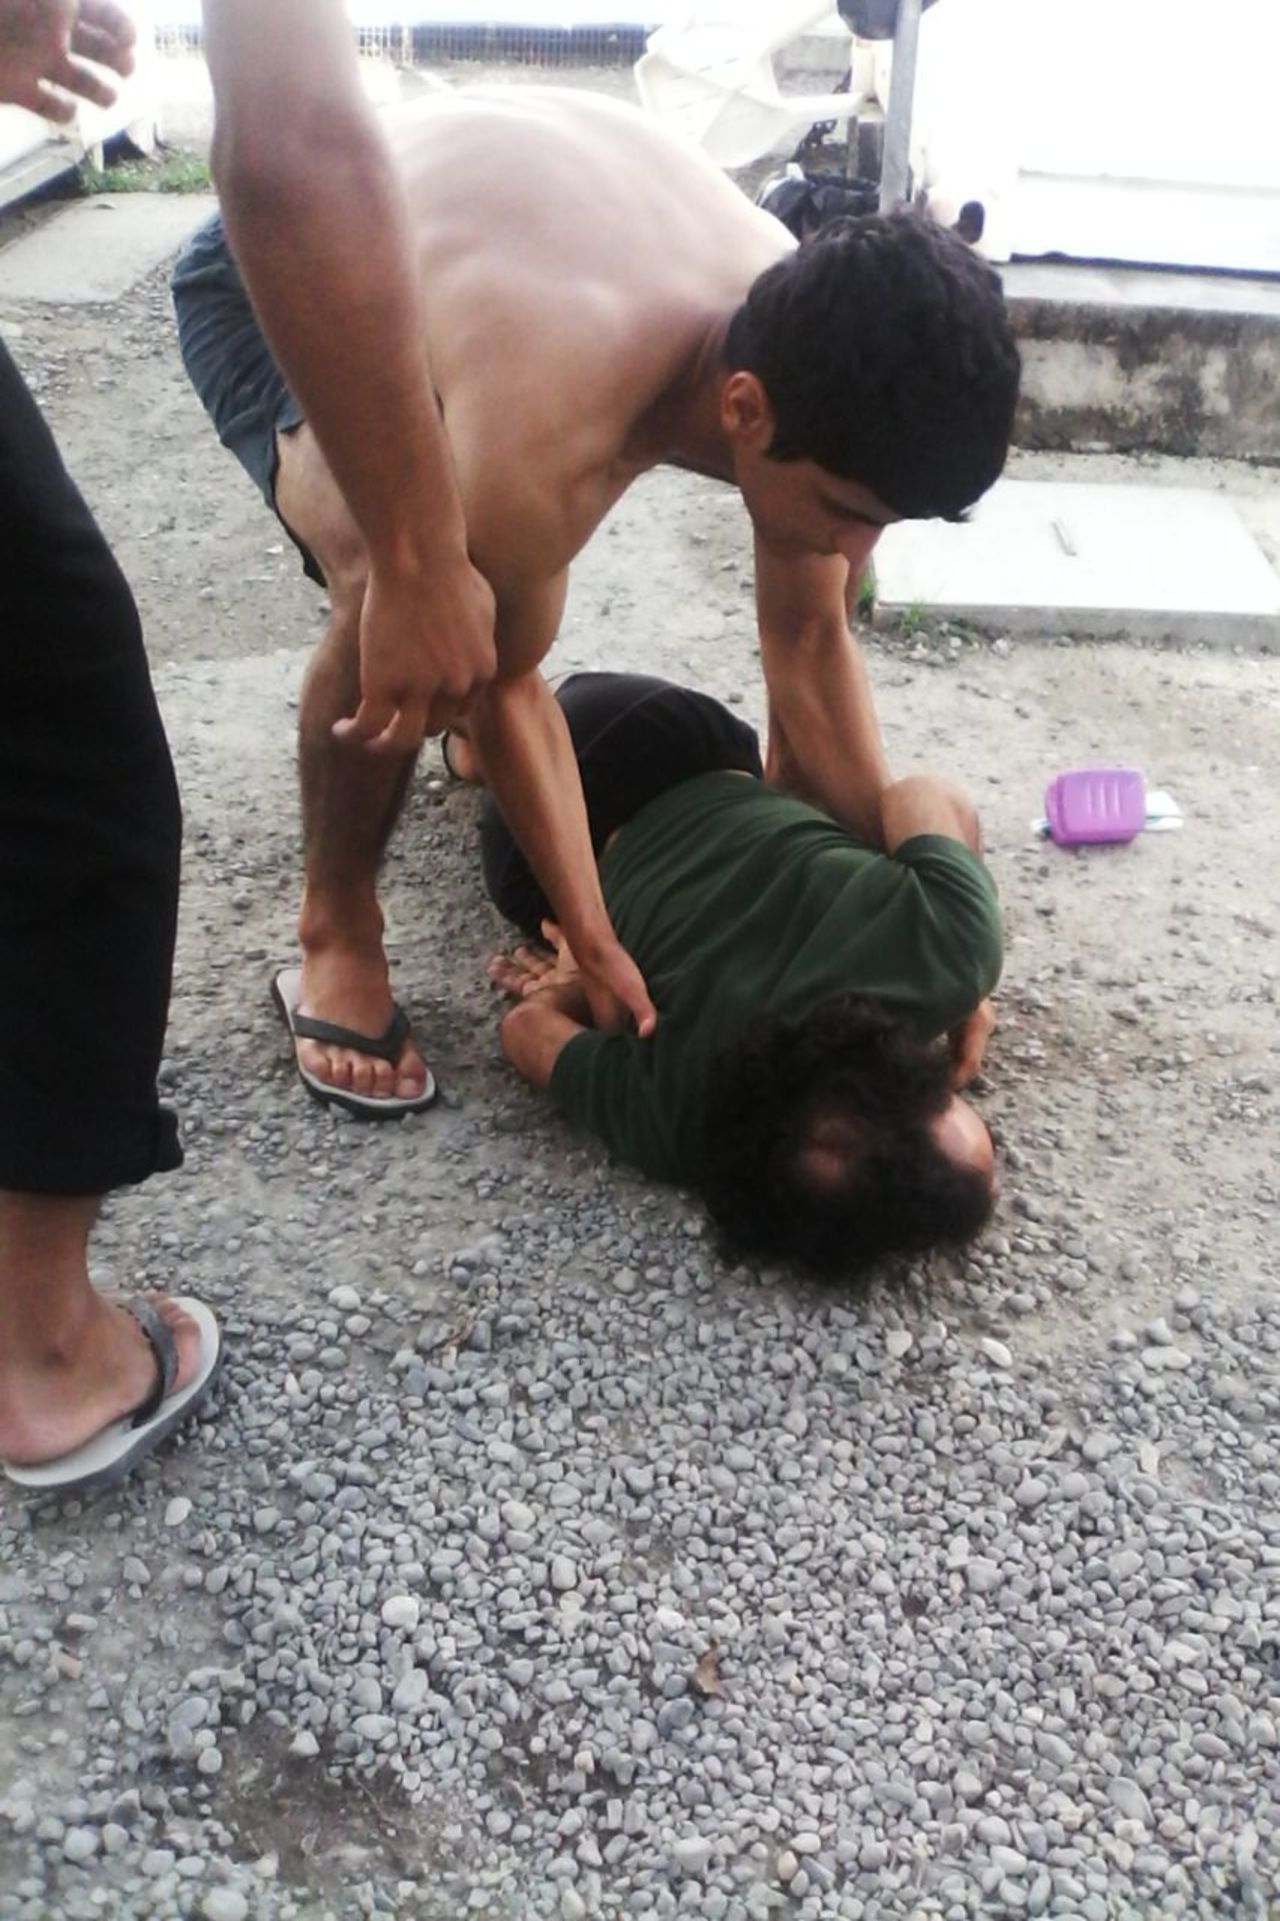 An image sent from a transferee to CNN, taken on Tuesday, February 20, showing a hunger striker who he said had collapsed on the ground.